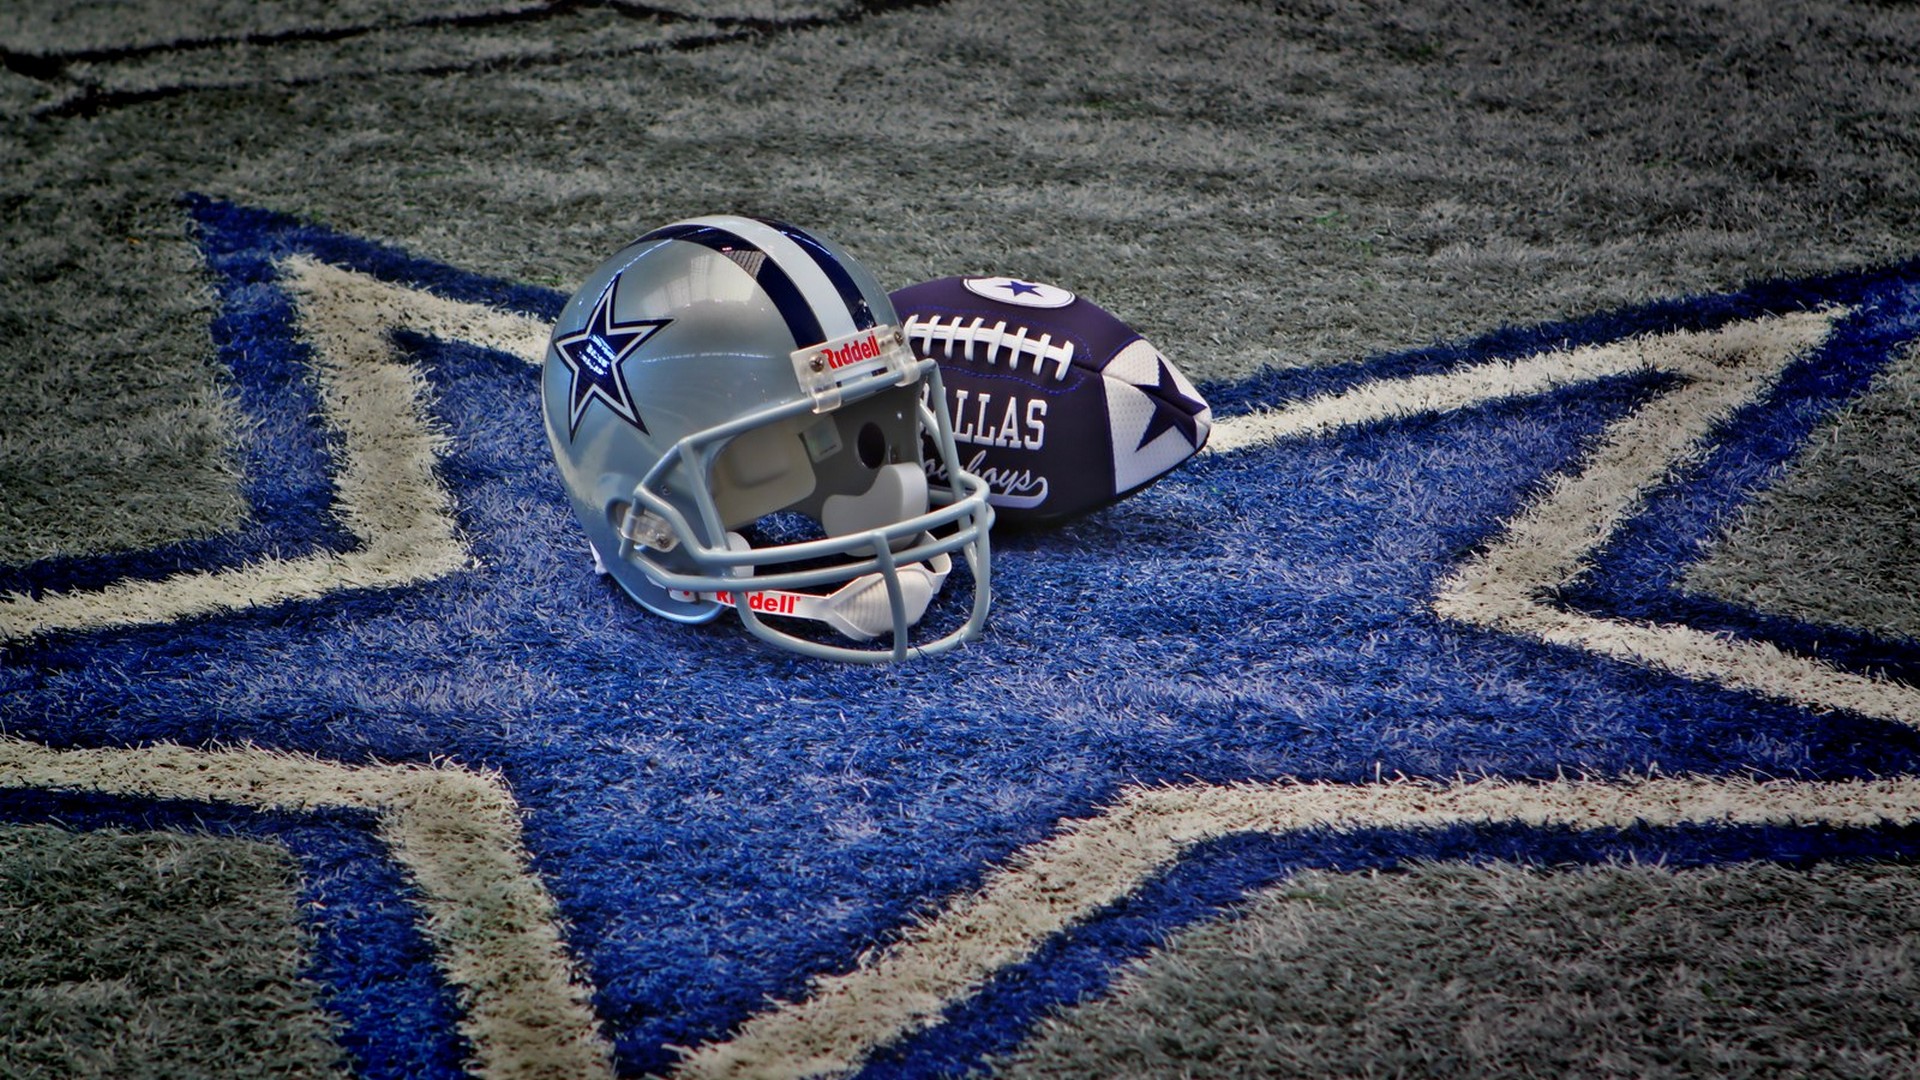 Dallas Cowboys Mac Wallpaper with high-resolution 1920x1080 pixel. Download and set as wallpaper for Desktop Computer, Apple iPhone X, XS Max, XR, 8, 7, 6, SE, iPad, Android